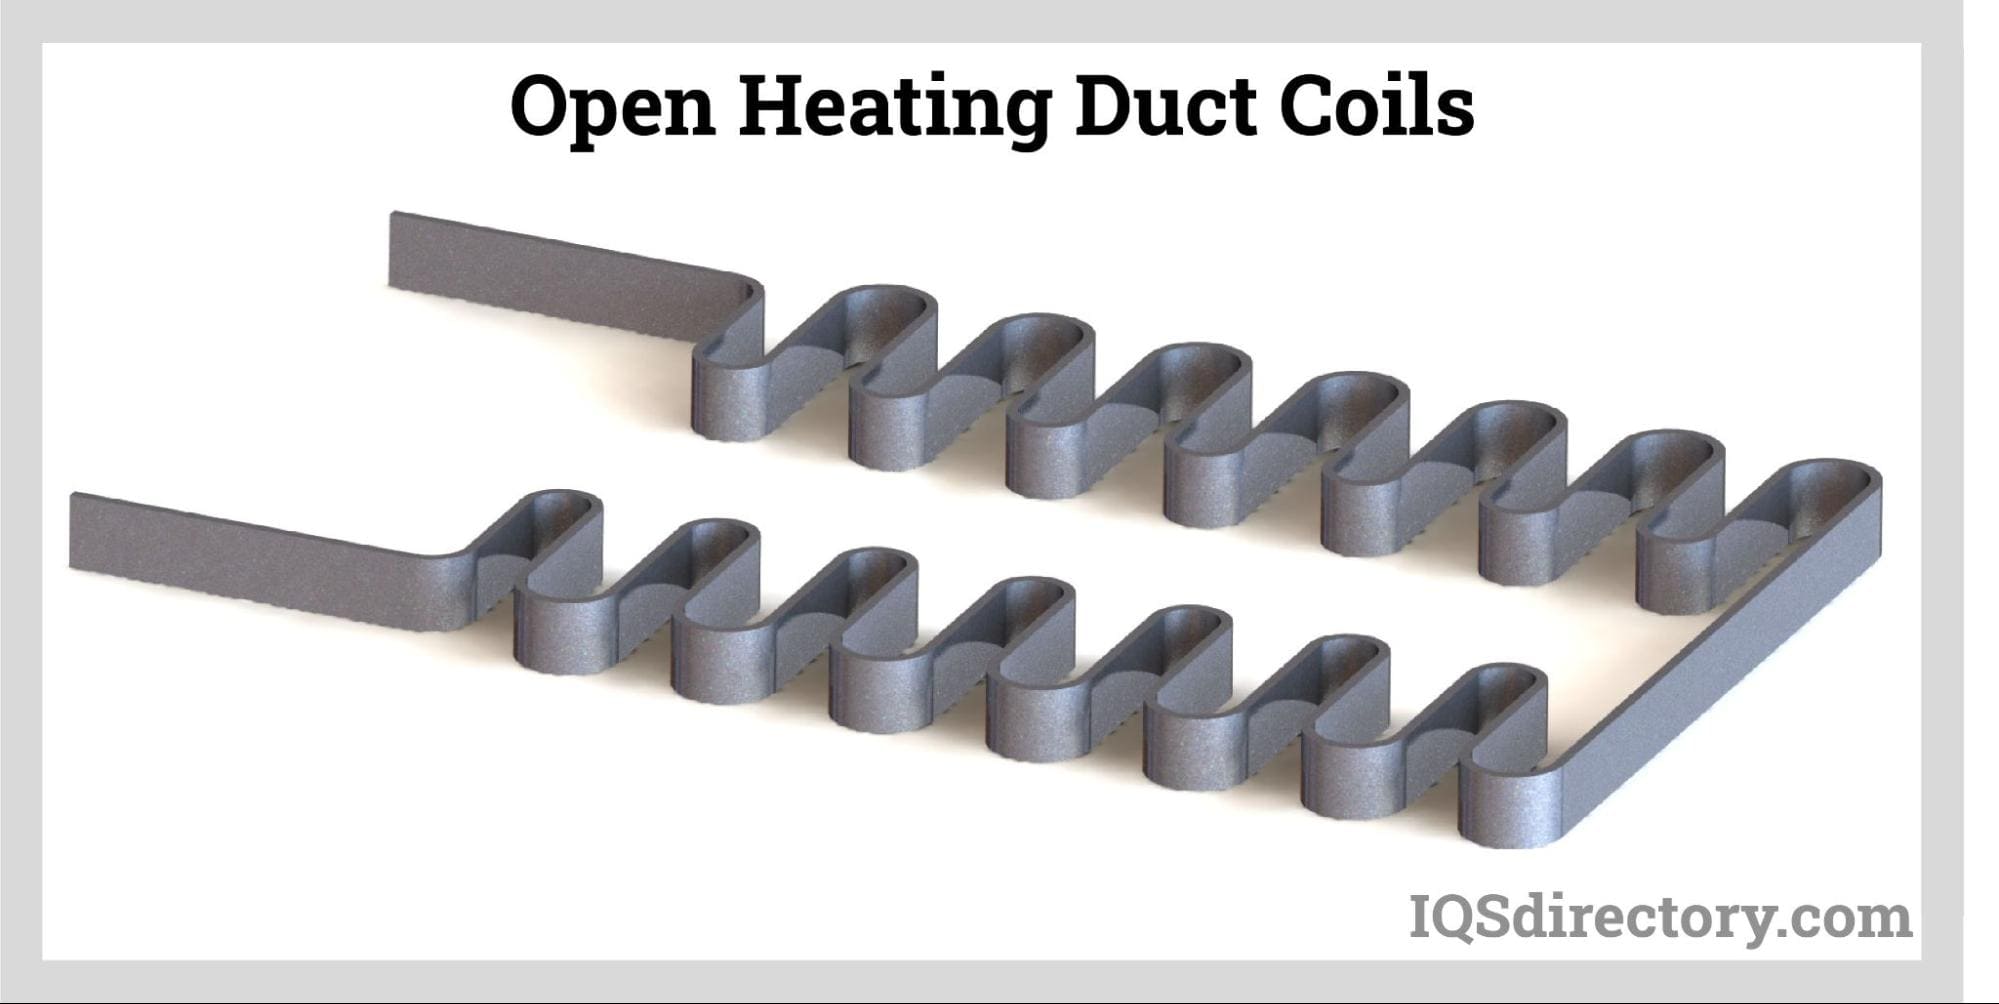 Open Heating Duct Coils